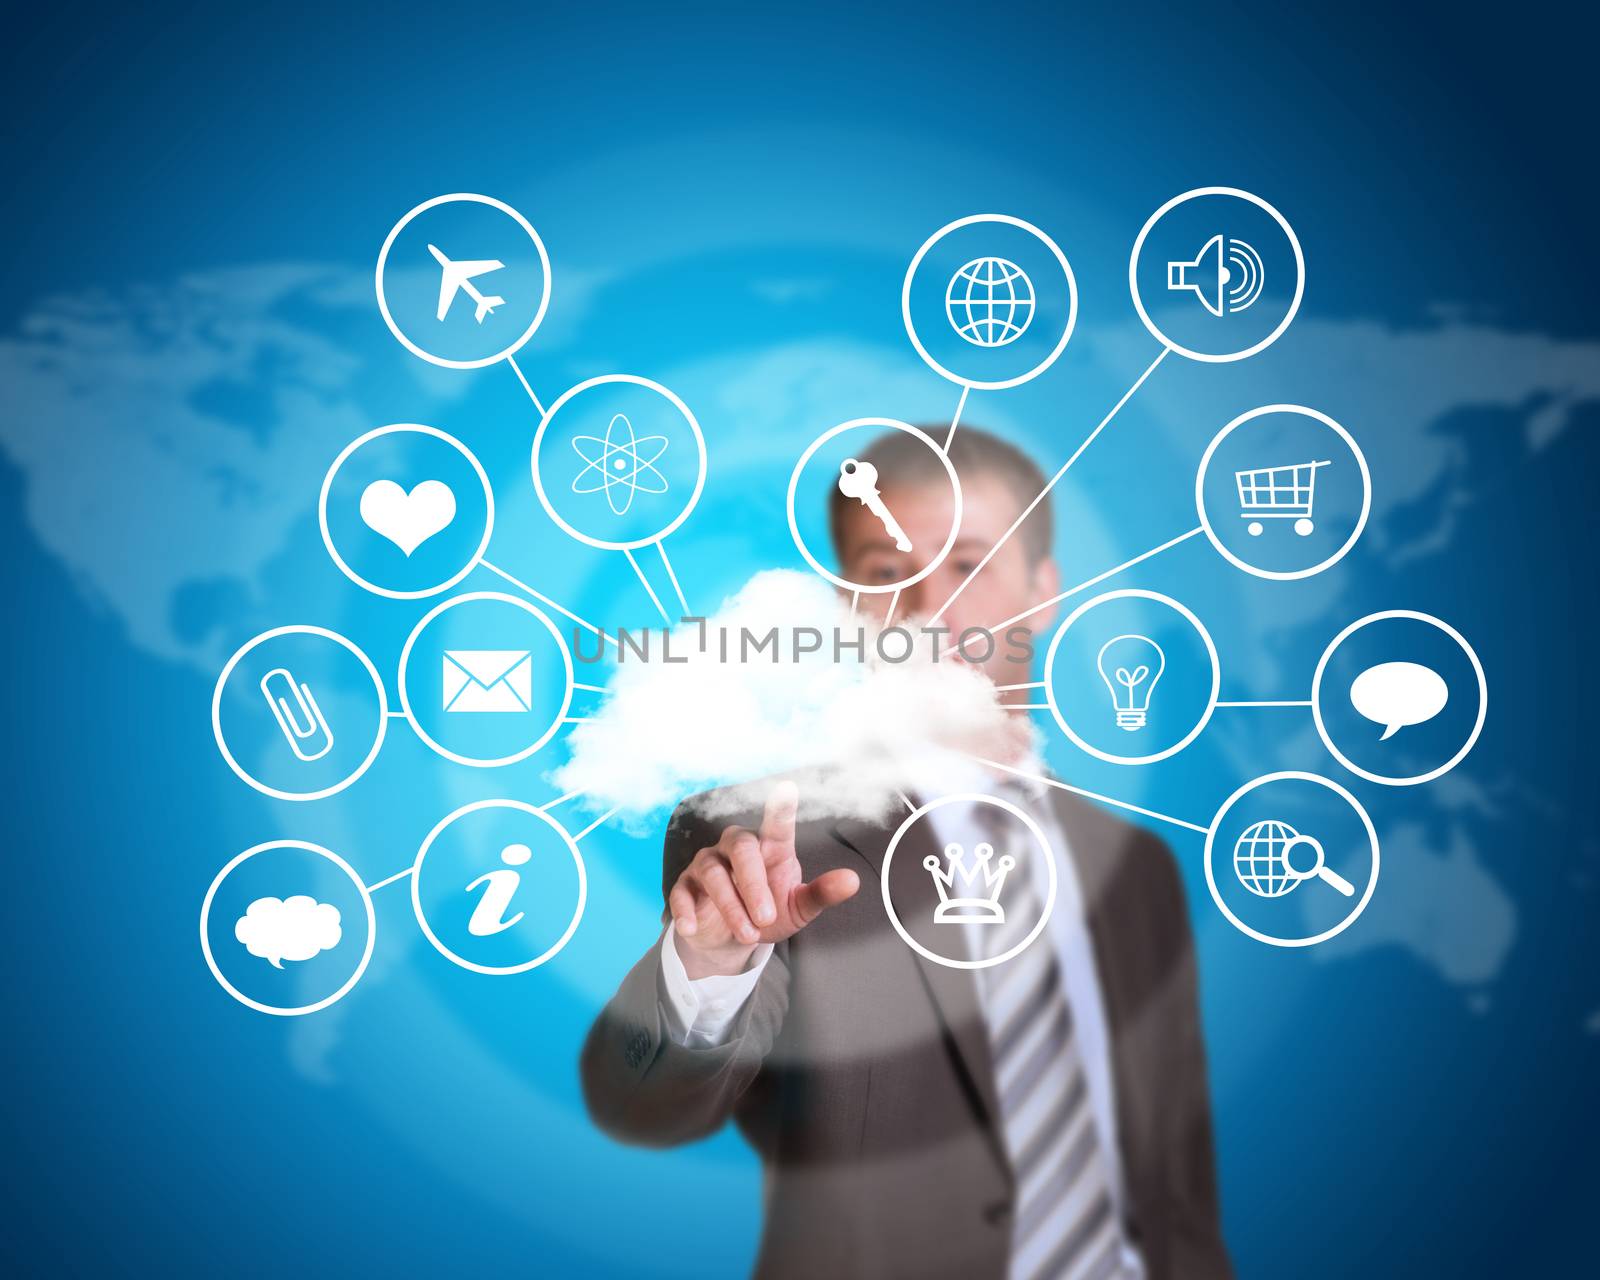 Business man pointing her finger at cloud with computer icons. Technology concept. World map as backdrop